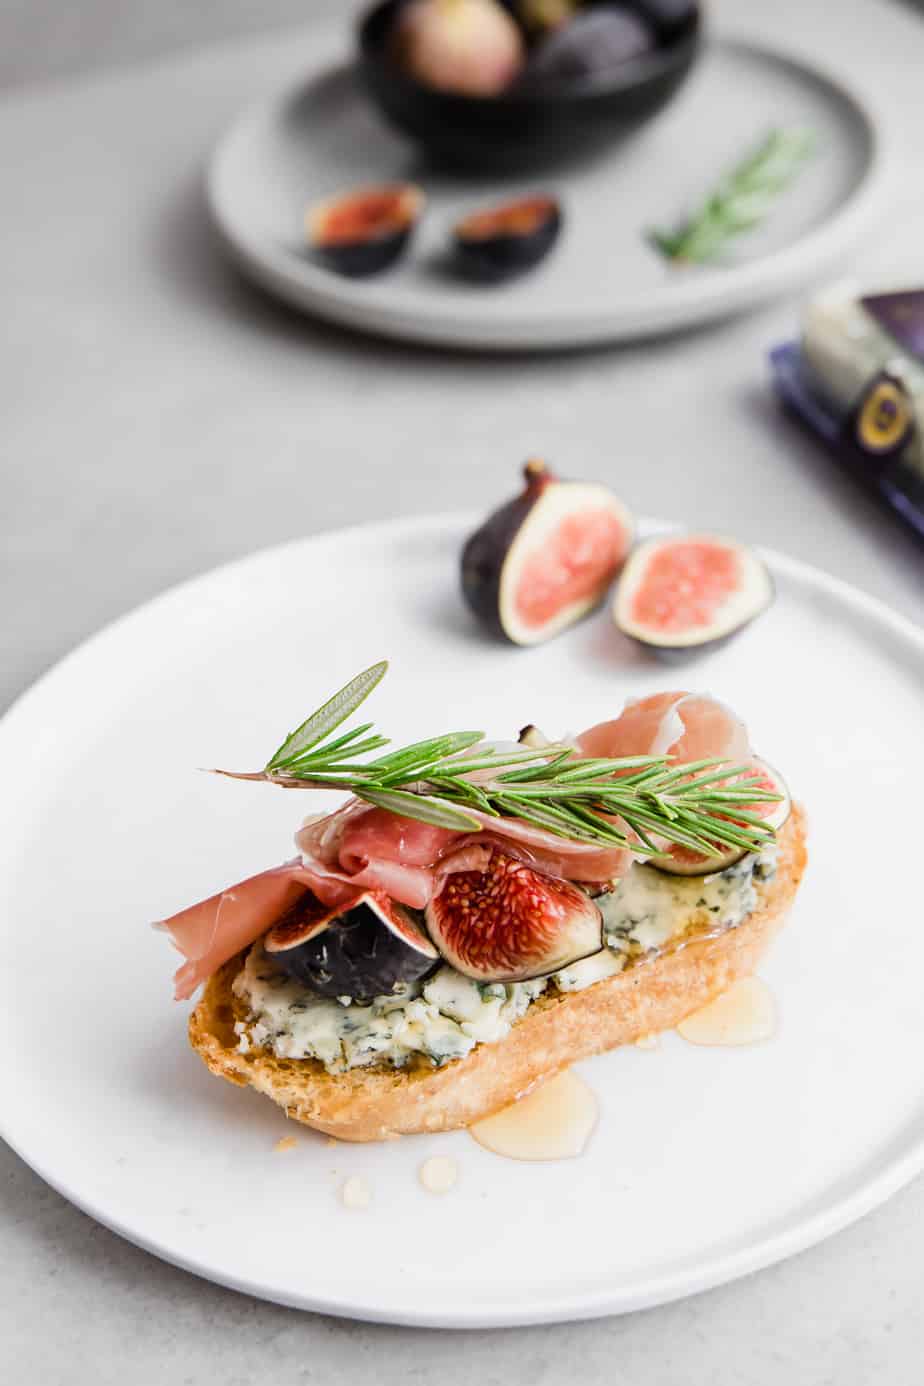 A Classic Fig And Blue Cheese Bruschetta is the ideal go-to for your next snack, appetizer, or for date-night with your special person. It's also perfect for dinner parties, picnics, and any occasion where you want to serve something that is simple yet sophisticated.